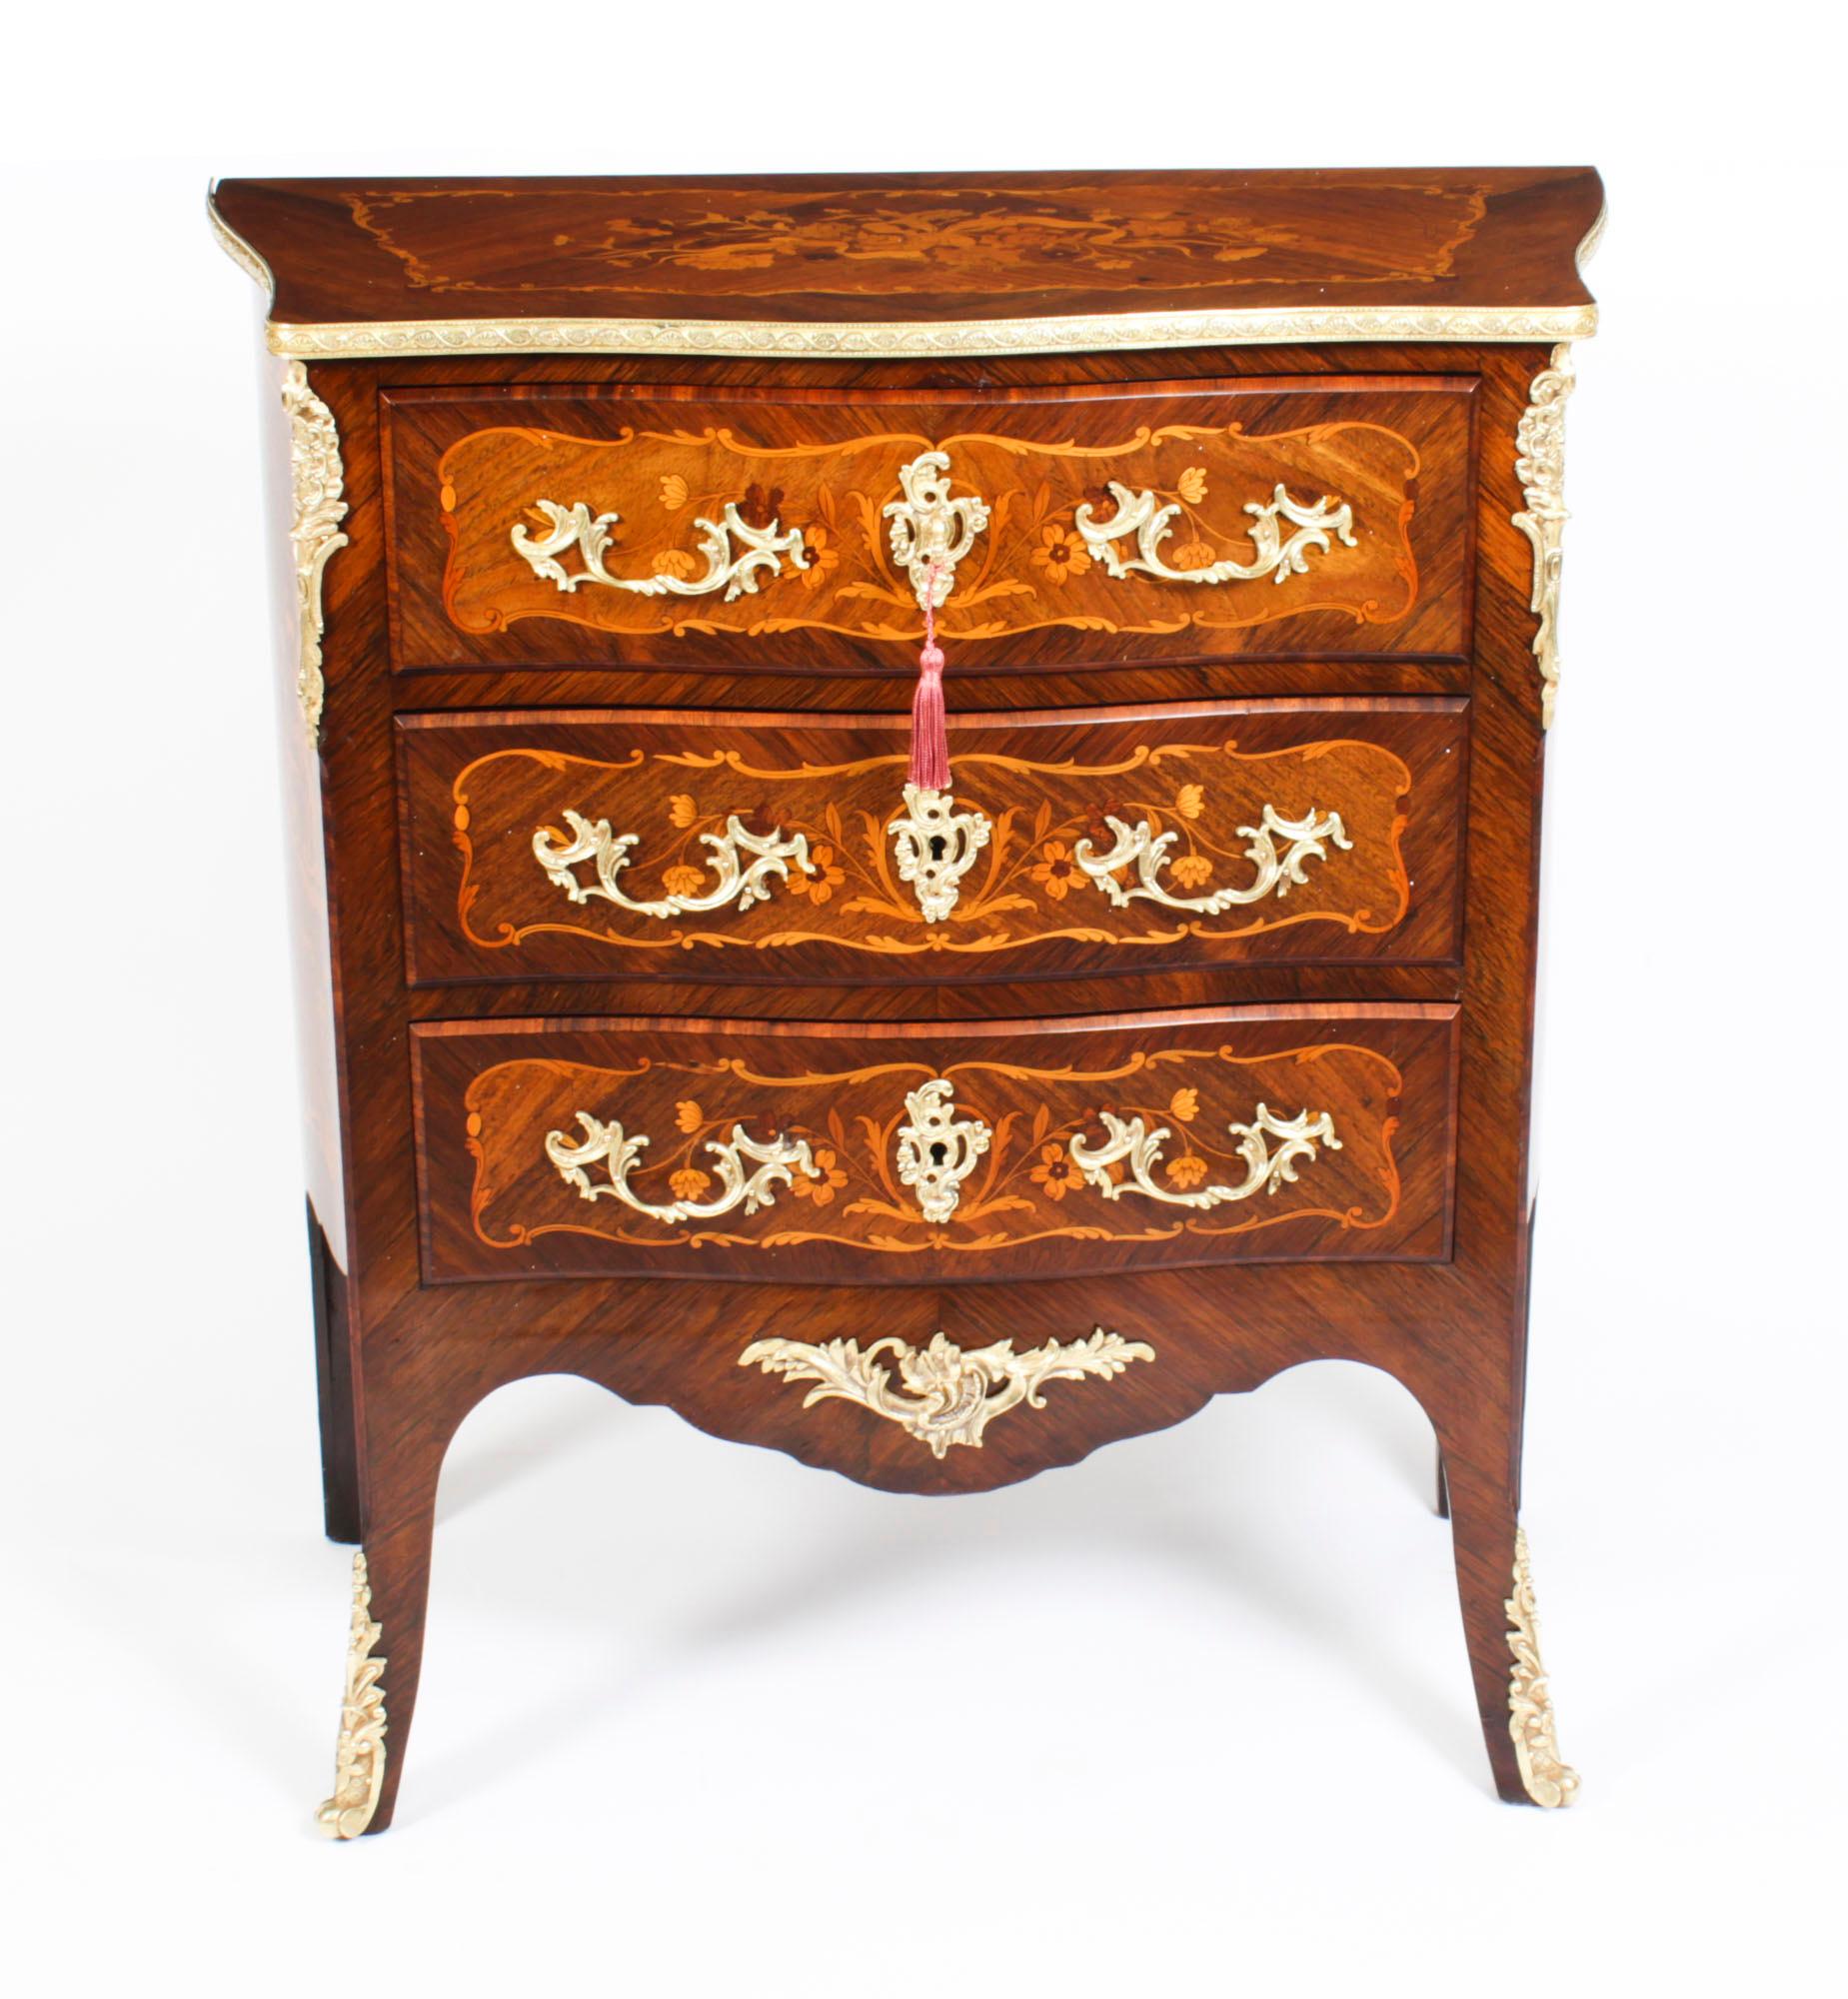 This is a stunning antique walnut, marquetry and ormolu mounted Louis Revival serpentine fronted commode, circa 1880 in date. 
 
The chest has a gonzalo alves cross banded top with decorative ormolu surround, with a central pannel featuring a ribbon